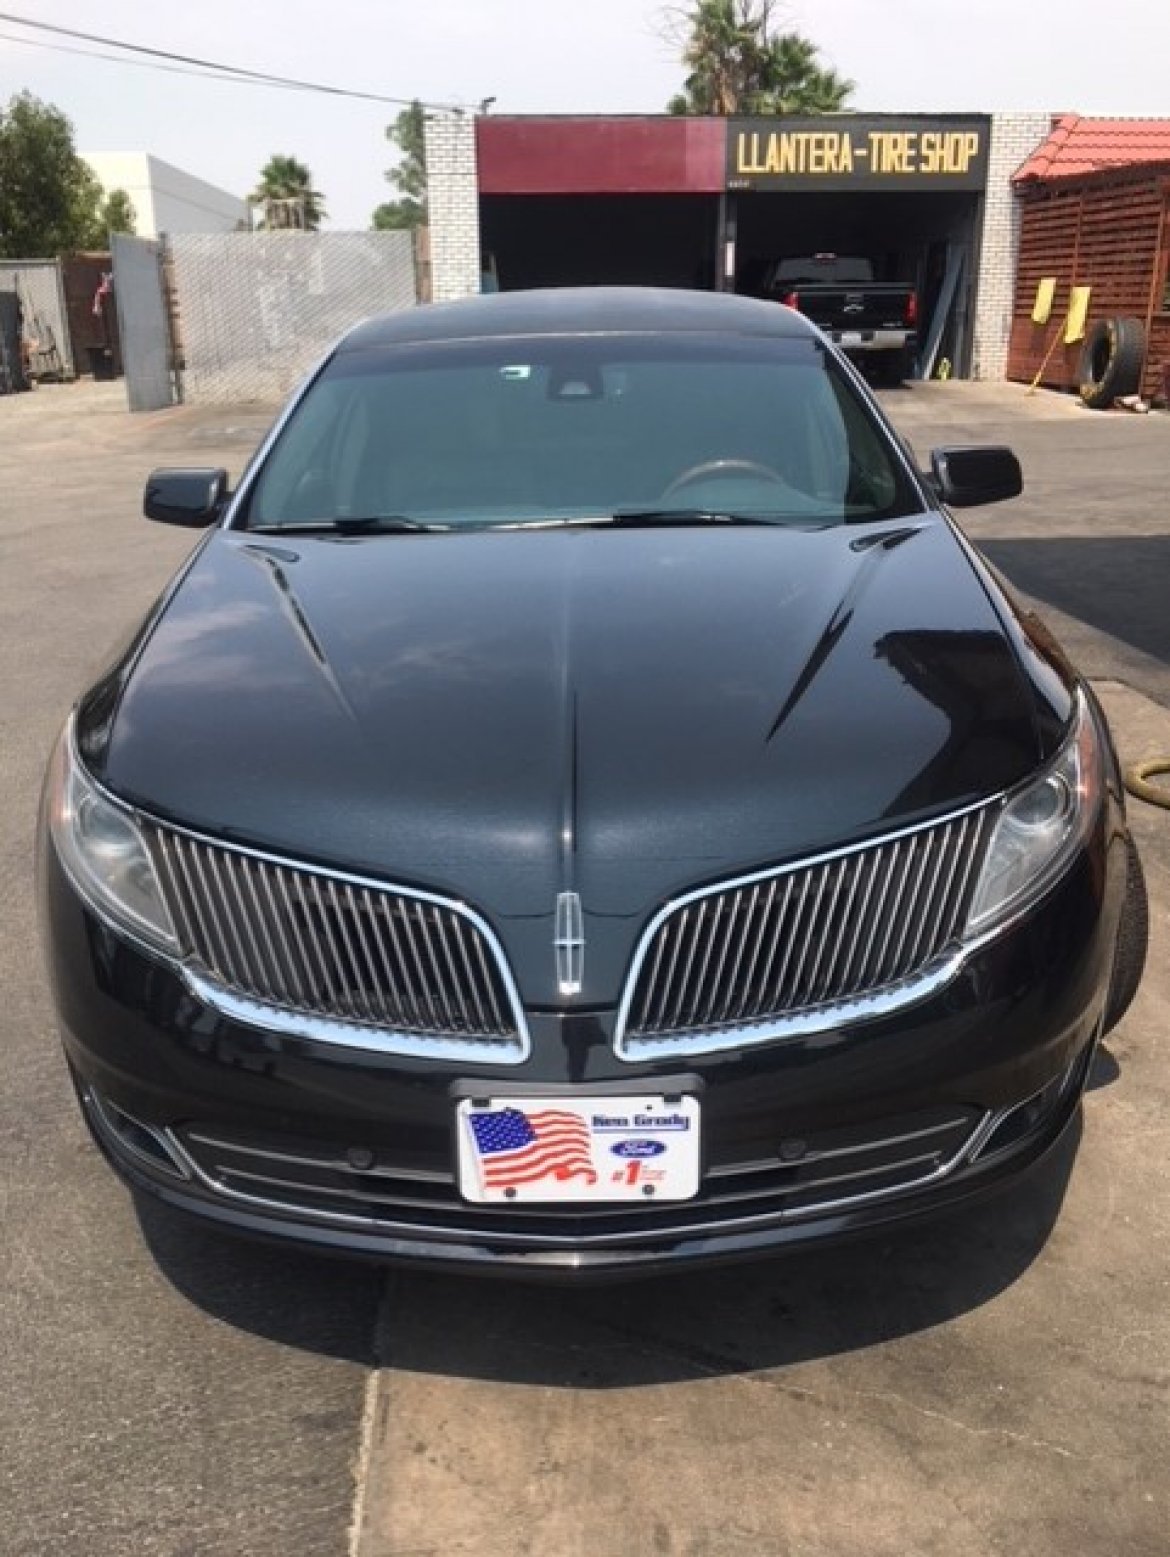 Limousine for sale: 2014 Lincoln MKS 62&quot; by Sterling Coach